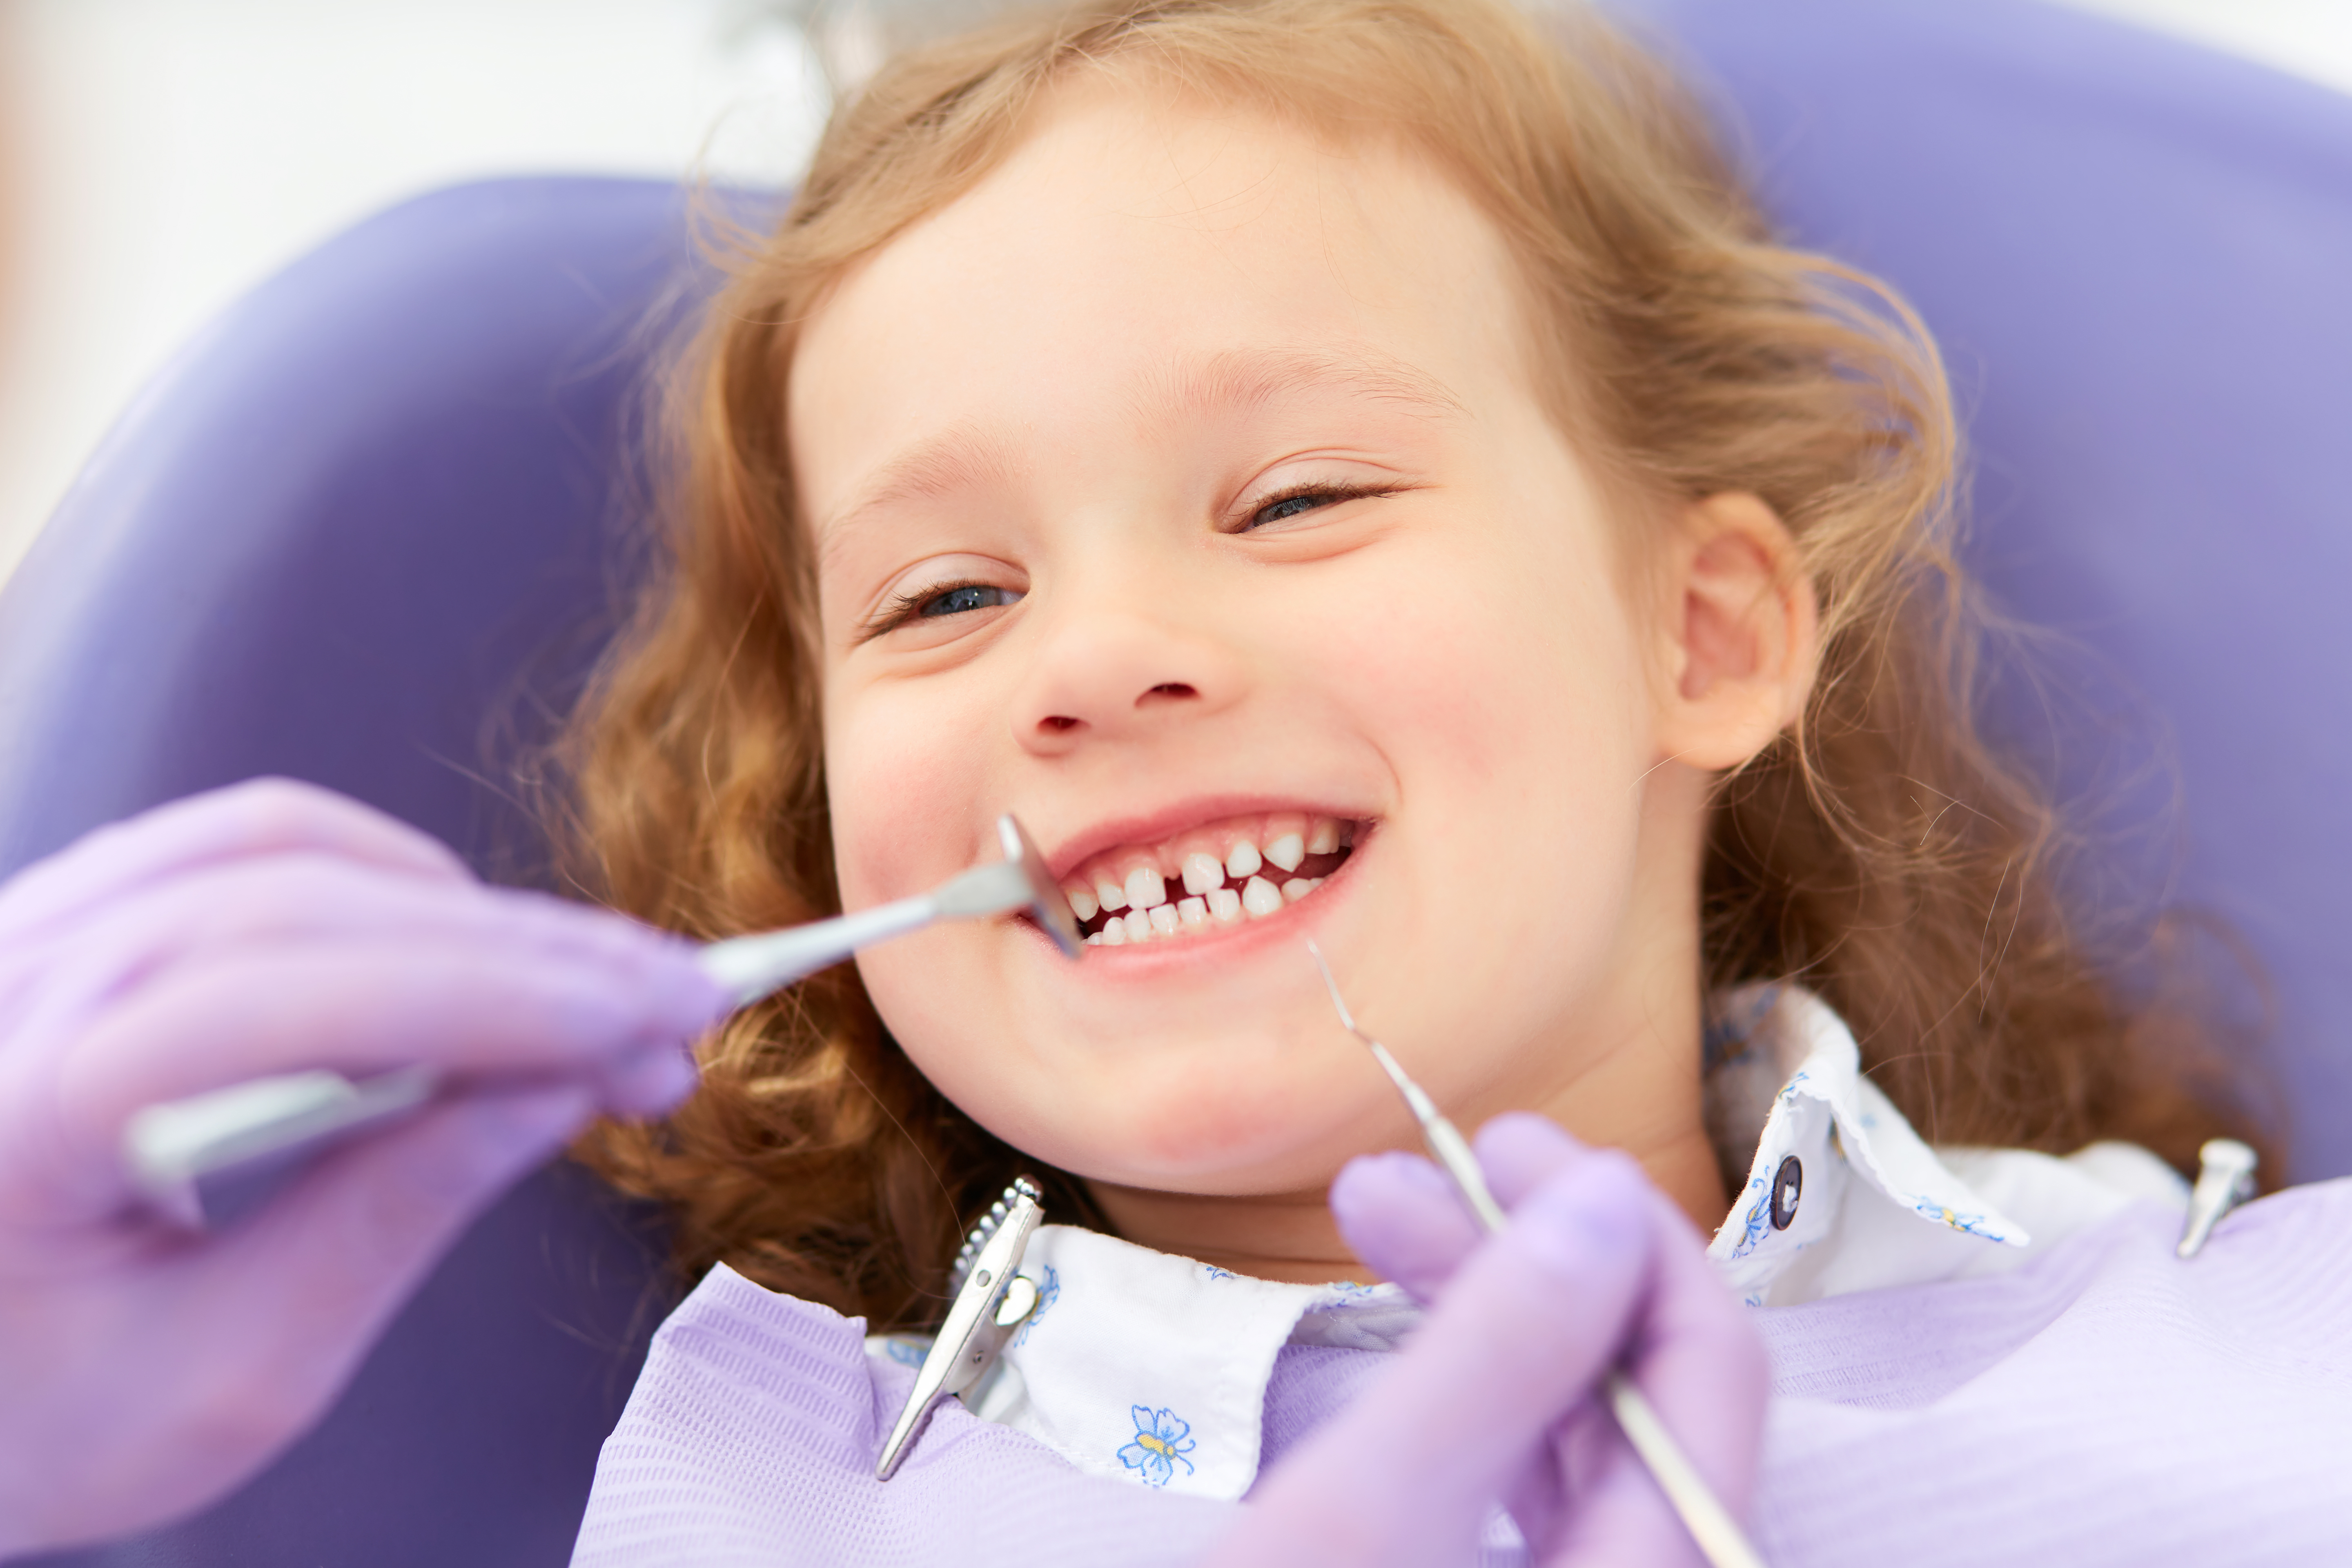 Child at Dentist getting Treated for Tongue Tie - The Super Dentists